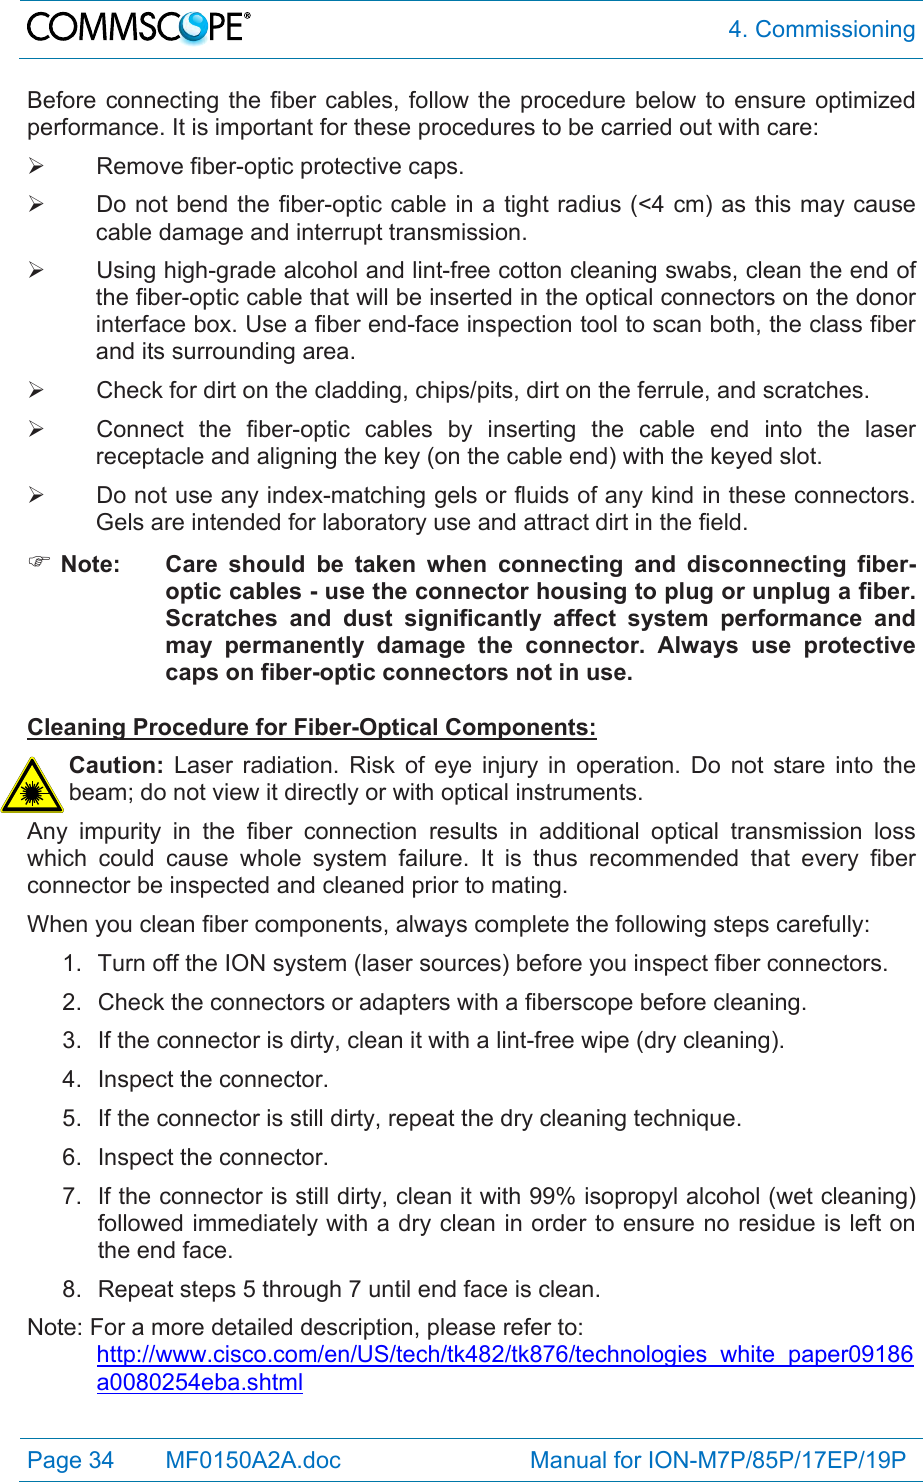  4. Commissioning Page 34   MF0150A2A.doc                             Manual for ION-M7P/85P/17EP/19P  Before connecting the fiber cables, follow the procedure below to ensure optimized performance. It is important for these procedures to be carried out with care:   Remove fiber-optic protective caps.   Do not bend the fiber-optic cable in a tight radius (&lt;4 cm) as this may cause cable damage and interrupt transmission.   Using high-grade alcohol and lint-free cotton cleaning swabs, clean the end of the fiber-optic cable that will be inserted in the optical connectors on the donor interface box. Use a fiber end-face inspection tool to scan both, the class fiber and its surrounding area.    Check for dirt on the cladding, chips/pits, dirt on the ferrule, and scratches.   Connect the fiber-optic cables by inserting the cable end into the laser receptacle and aligning the key (on the cable end) with the keyed slot.   Do not use any index-matching gels or fluids of any kind in these connectors. Gels are intended for laboratory use and attract dirt in the field.  Note:  Care should be taken when connecting and disconnecting fiber-optic cables - use the connector housing to plug or unplug a fiber. Scratches and dust significantly affect system performance and may permanently damage the connector. Always use protective caps on fiber-optic connectors not in use.  Cleaning Procedure for Fiber-Optical Components: Caution: Laser radiation. Risk of eye injury in operation. Do not stare into the beam; do not view it directly or with optical instruments. Any impurity in the fiber connection results in additional optical transmission loss which could cause whole system failure. It is thus recommended that every fiber connector be inspected and cleaned prior to mating. When you clean fiber components, always complete the following steps carefully: 1.  Turn off the ION system (laser sources) before you inspect fiber connectors. 2.  Check the connectors or adapters with a fiberscope before cleaning. 3.  If the connector is dirty, clean it with a lint-free wipe (dry cleaning). 4. Inspect the connector. 5.  If the connector is still dirty, repeat the dry cleaning technique. 6. Inspect the connector. 7.  If the connector is still dirty, clean it with 99% isopropyl alcohol (wet cleaning) followed immediately with a dry clean in order to ensure no residue is left on the end face. 8.  Repeat steps 5 through 7 until end face is clean. Note: For a more detailed description, please refer to:  http://www.cisco.com/en/US/tech/tk482/tk876/technologies_white_paper09186a0080254eba.shtml 